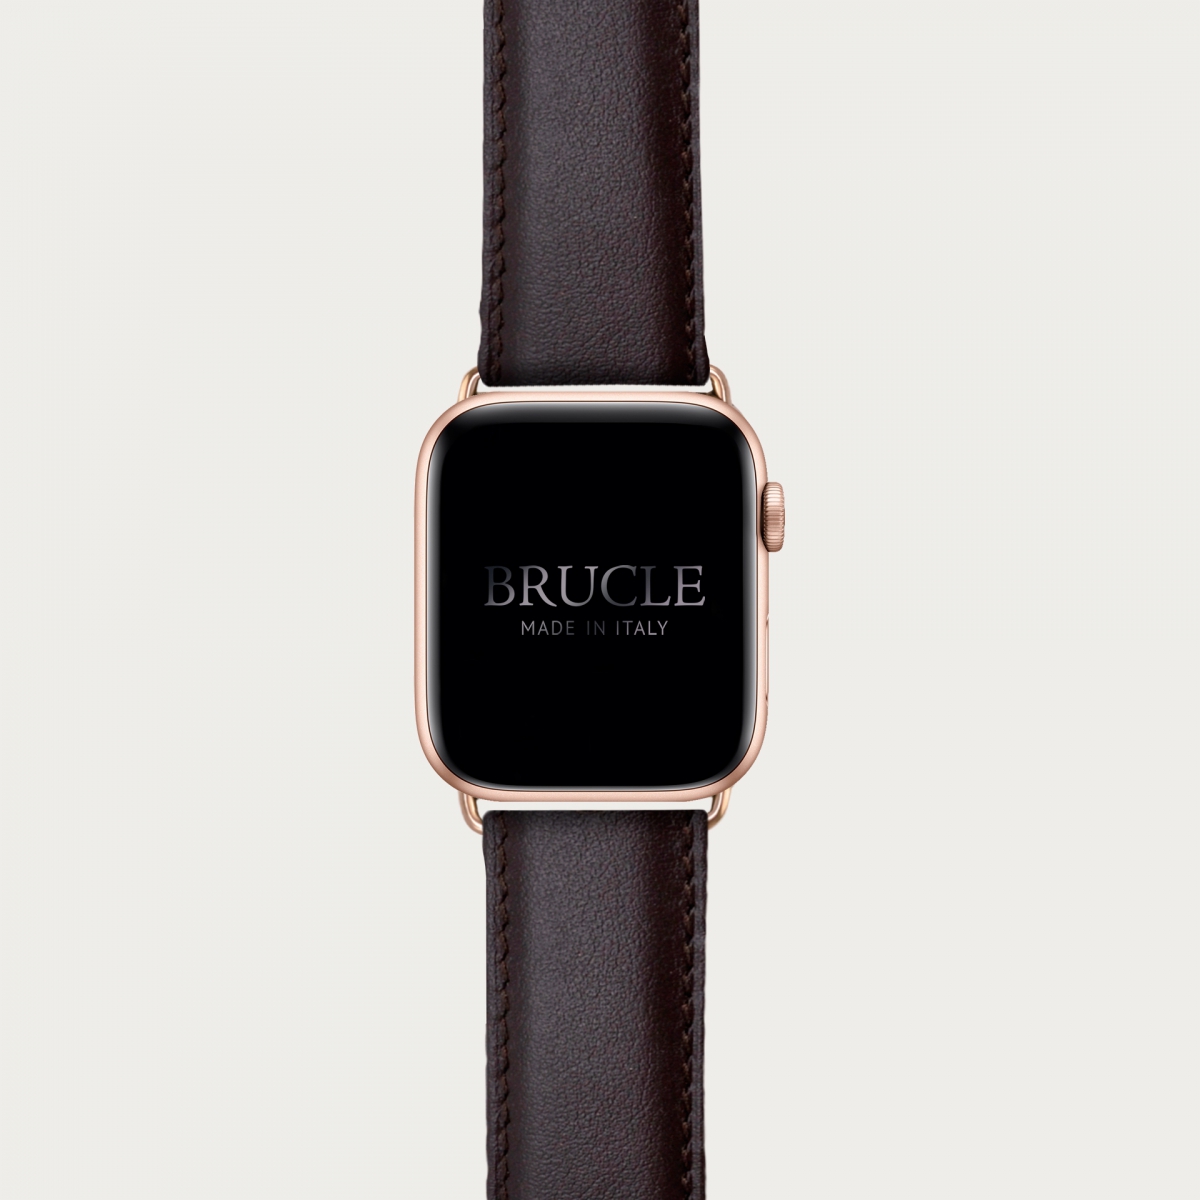 Brucle Leather Watch band compatible with Apple Watch / Samsung smartwatch, brown